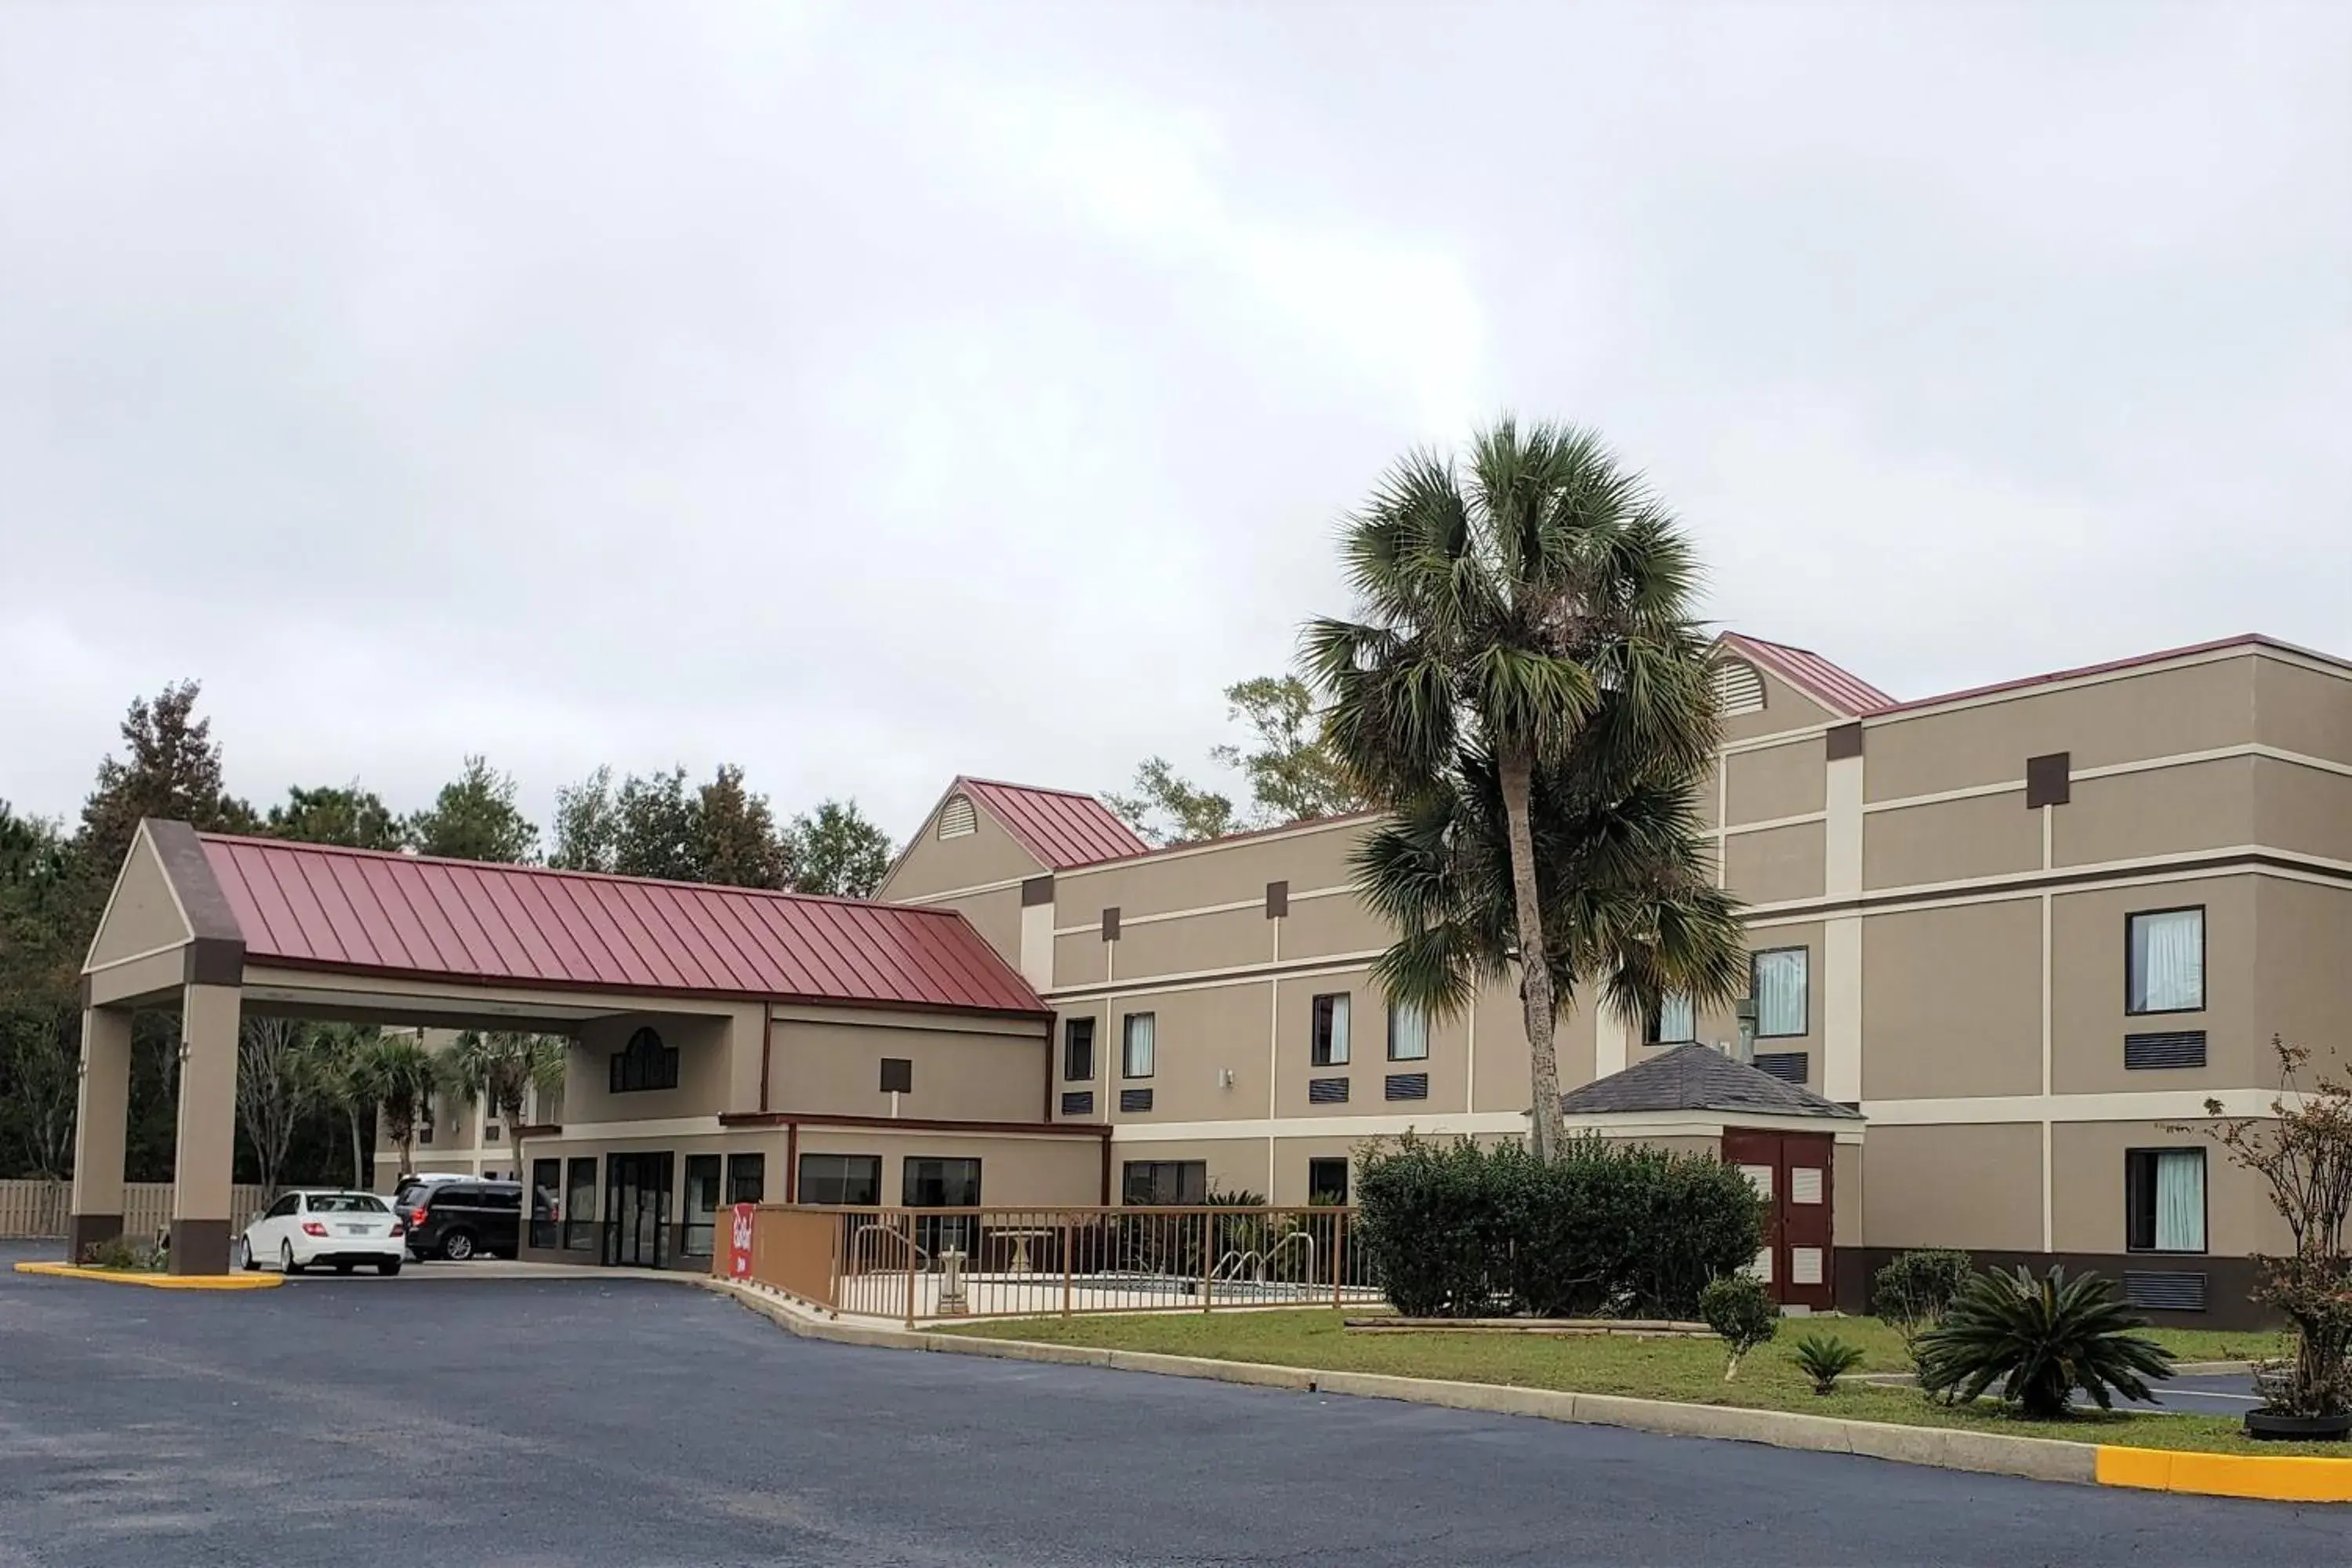 Property Building in Red Roof Inn Moss Point